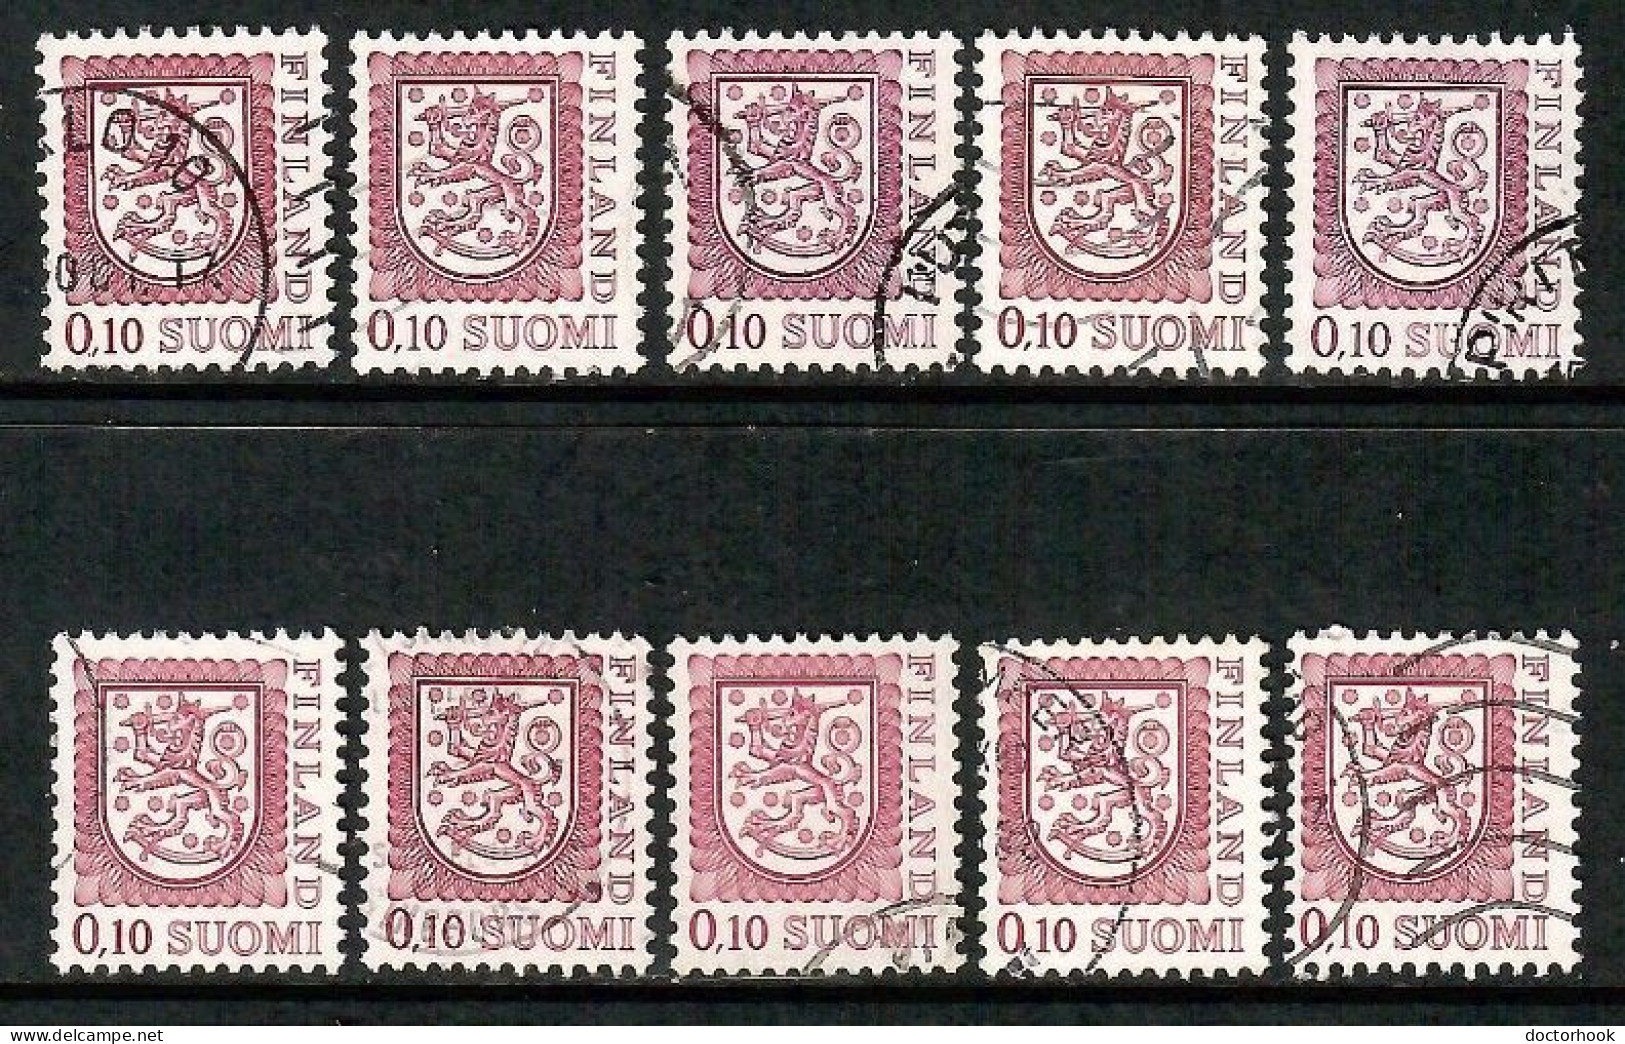 FINLAND   Scott # 555 USED WHOLESALE LOT OF 10 (CONDITION AS PER SCAN) (WH-632) - Colecciones